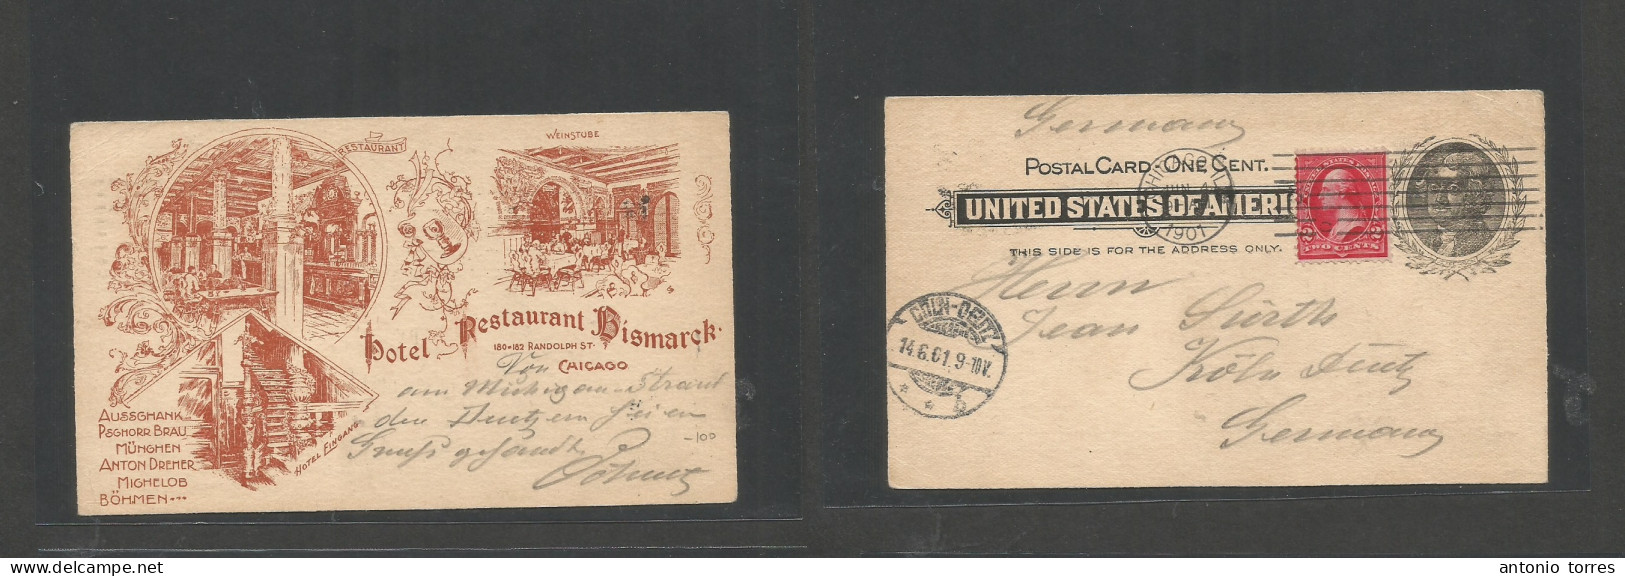 Usa - Stationery. 1901 (4 June) Chicago, Ill - Germany, Coln (14 June) Bismarck Restaurant Hotel 1c Black Red Private Pr - Other & Unclassified